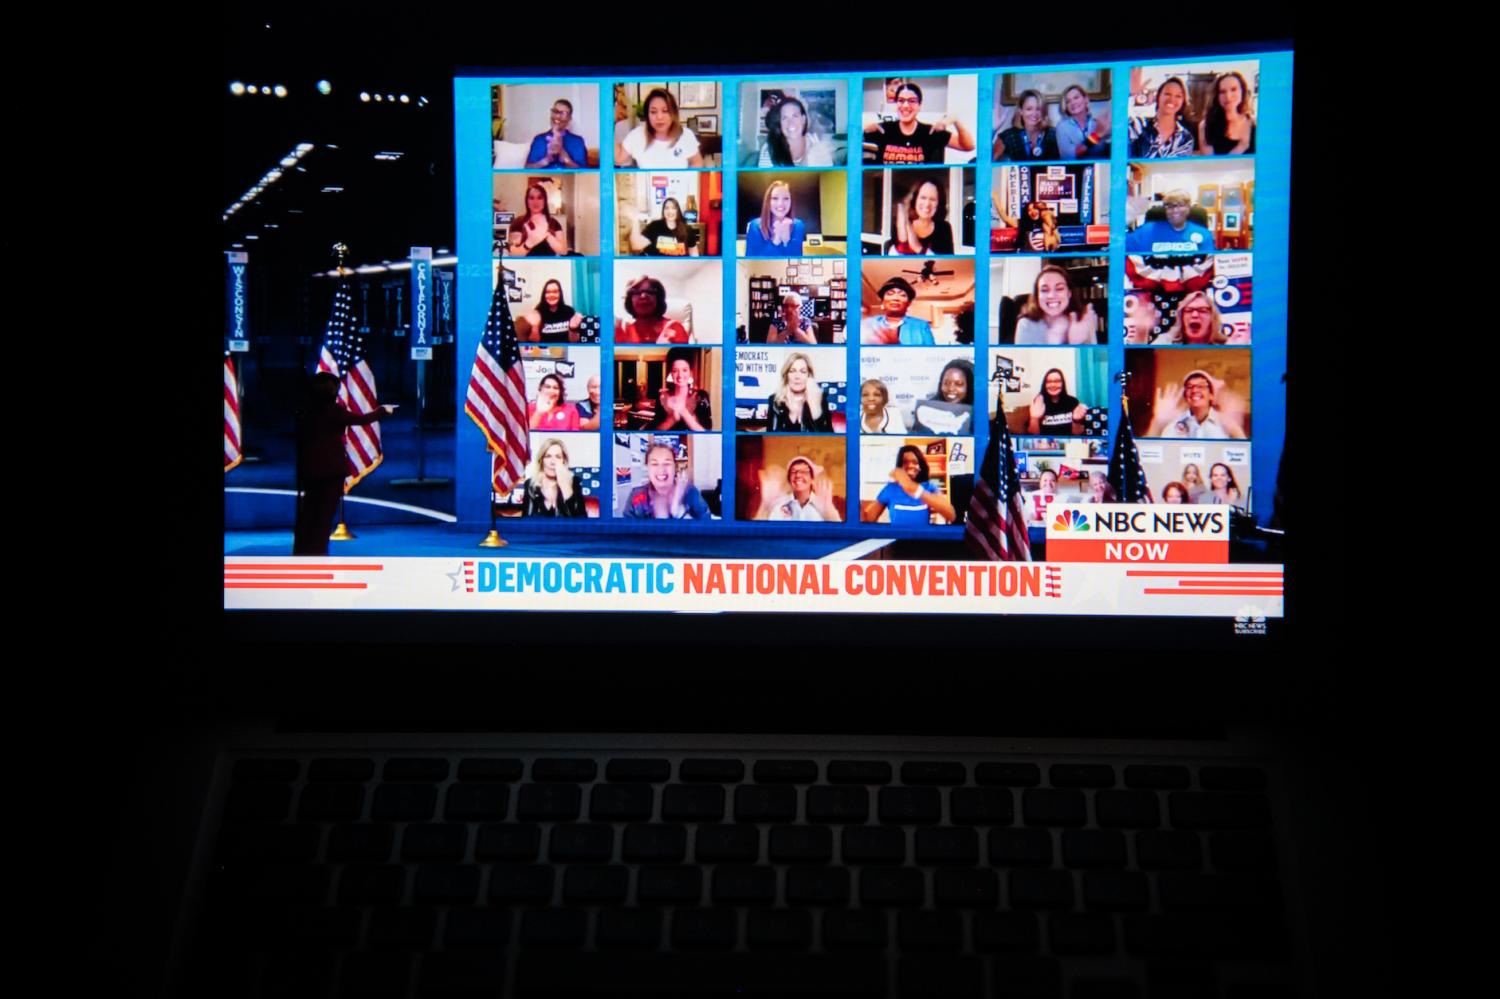 A photo illustration of a laptop computer screen shows Senator Kamala Harris waving to virtual watch party attendees after accepting the Vice Presidential nomination from the Democratic Party, on the third night of the 2020 Democratic National Convention, which is being held almost entirely virtually, in Washington, D.C., on August 19, 2020, amid the Coronavirus pandemic. Before Sen. Kamala Harris officially accepted the Vice Presidential nomination, major Democratic Party figures spoke on night three of the virtual convention, including Speaker Nancy Pelosi, Former President Barack Obama, Senator Elizabeth Warren and Hilary Clinton. (Graeme Sloan/Sipa USA)No Use UK. No Use Germany.